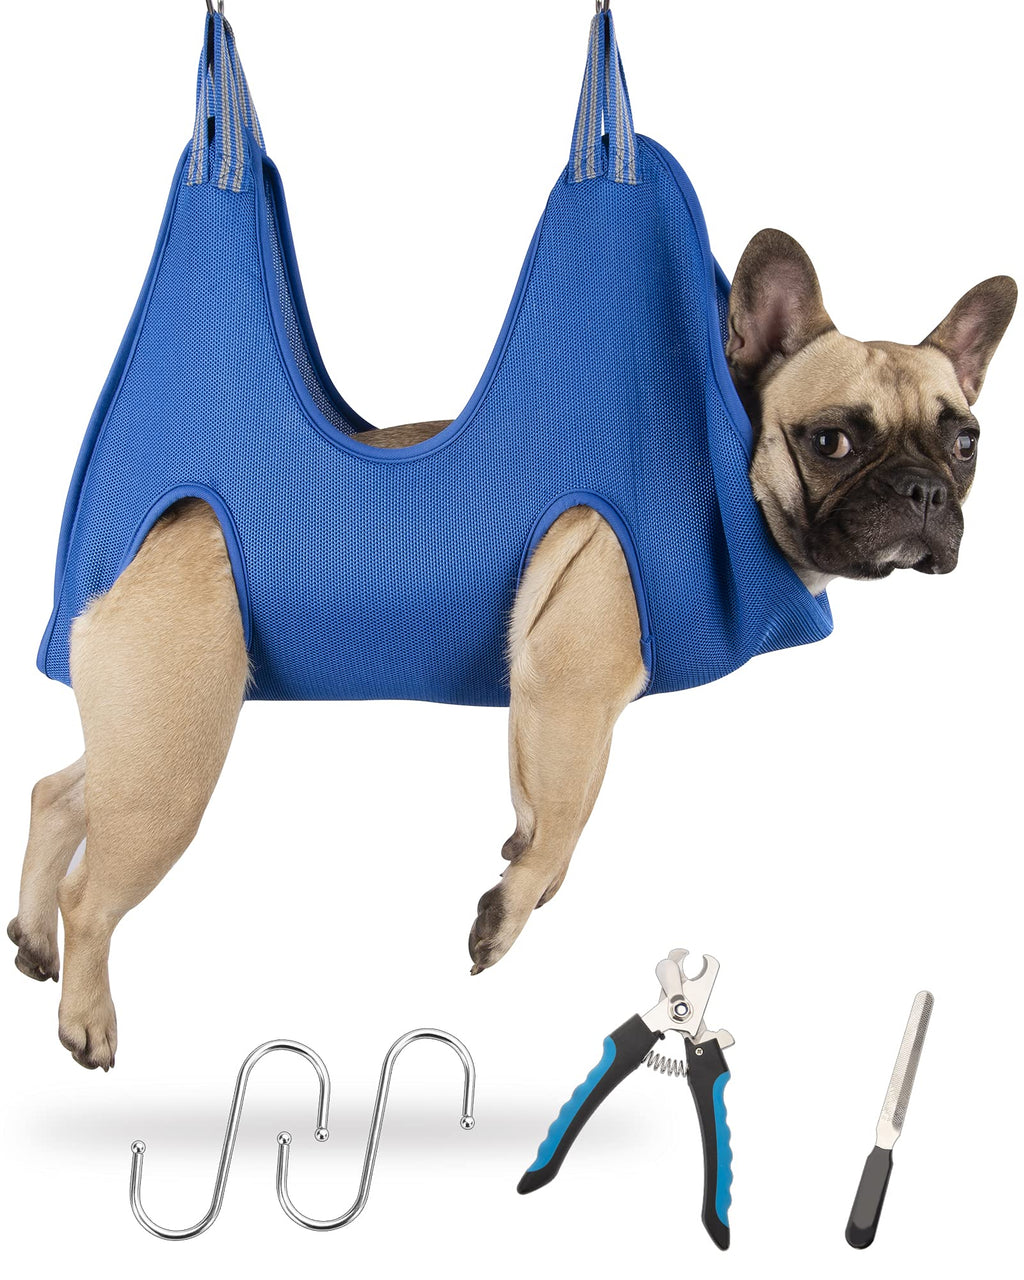 Kkiimatt 5 in 1 Pet Grooming Hammock, Breathable Dog Hammock Restraint Bag for Pet, Dog Grooming Helper for Bathing Washing Grooming and Trimming Nail XS Blue - PawsPlanet Australia